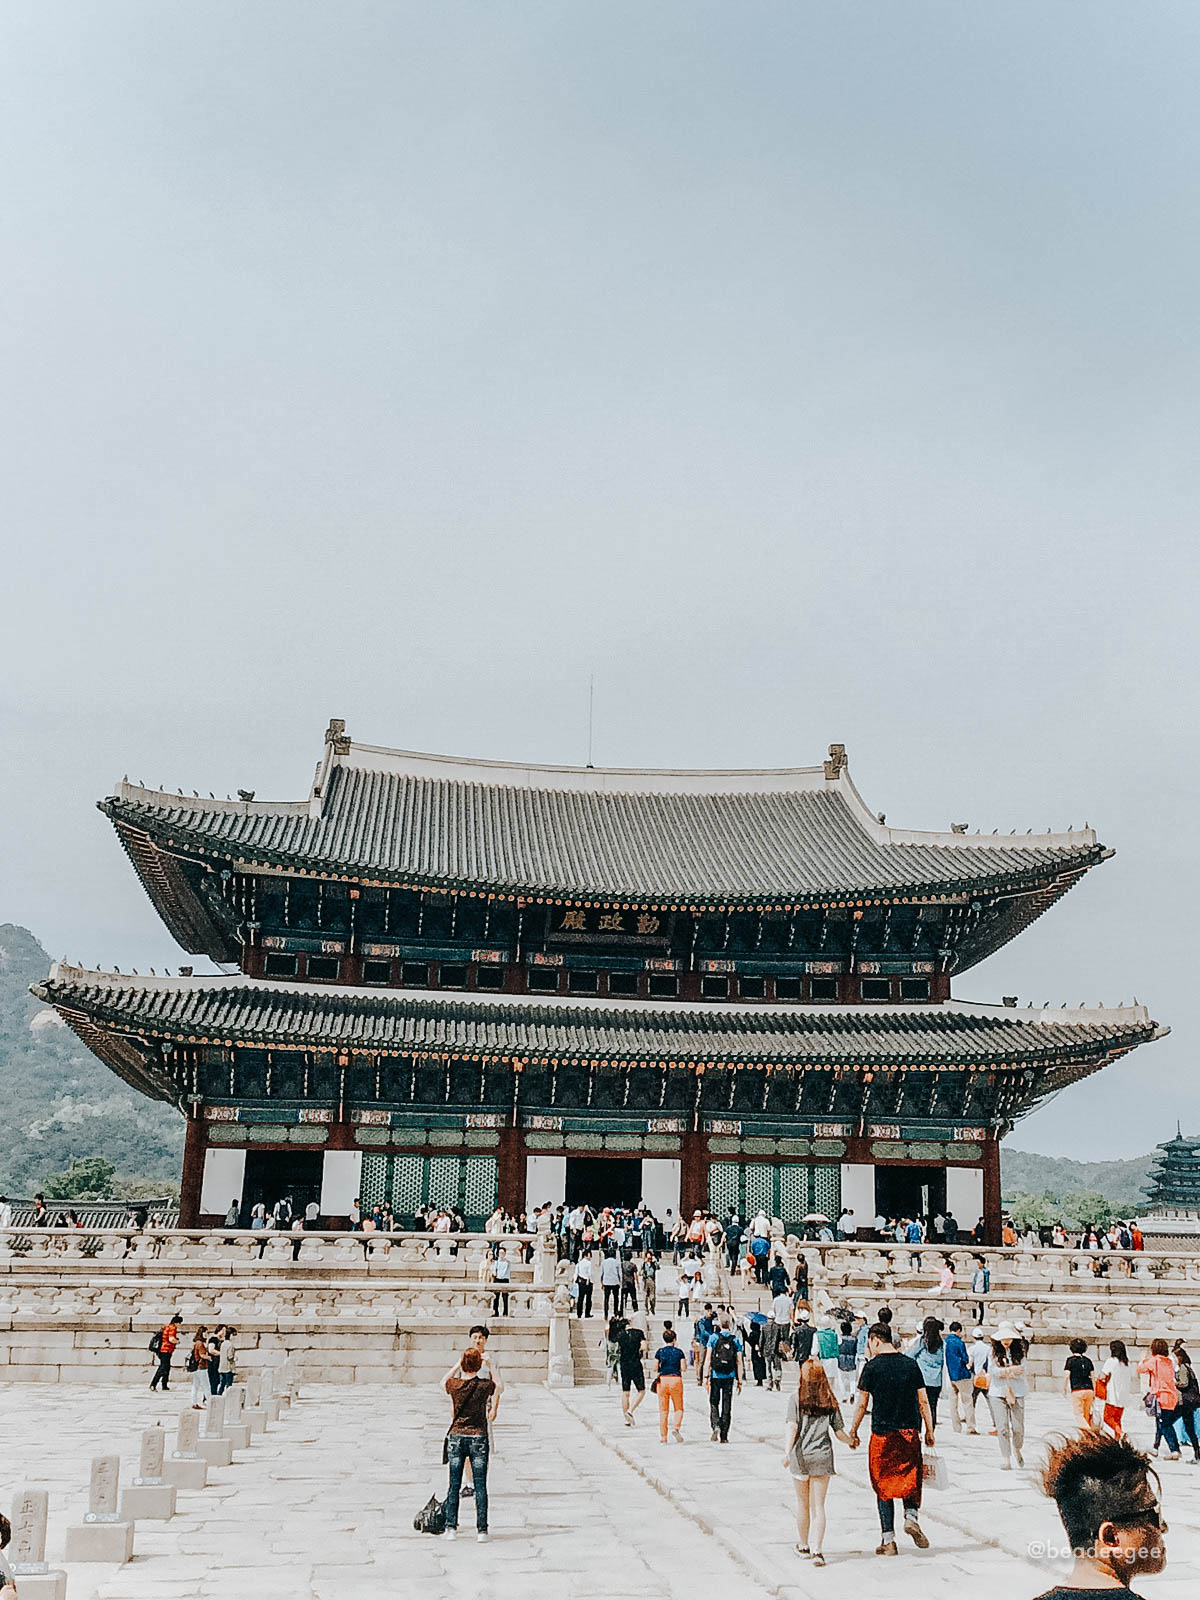 A palace in seoul with so many tourists